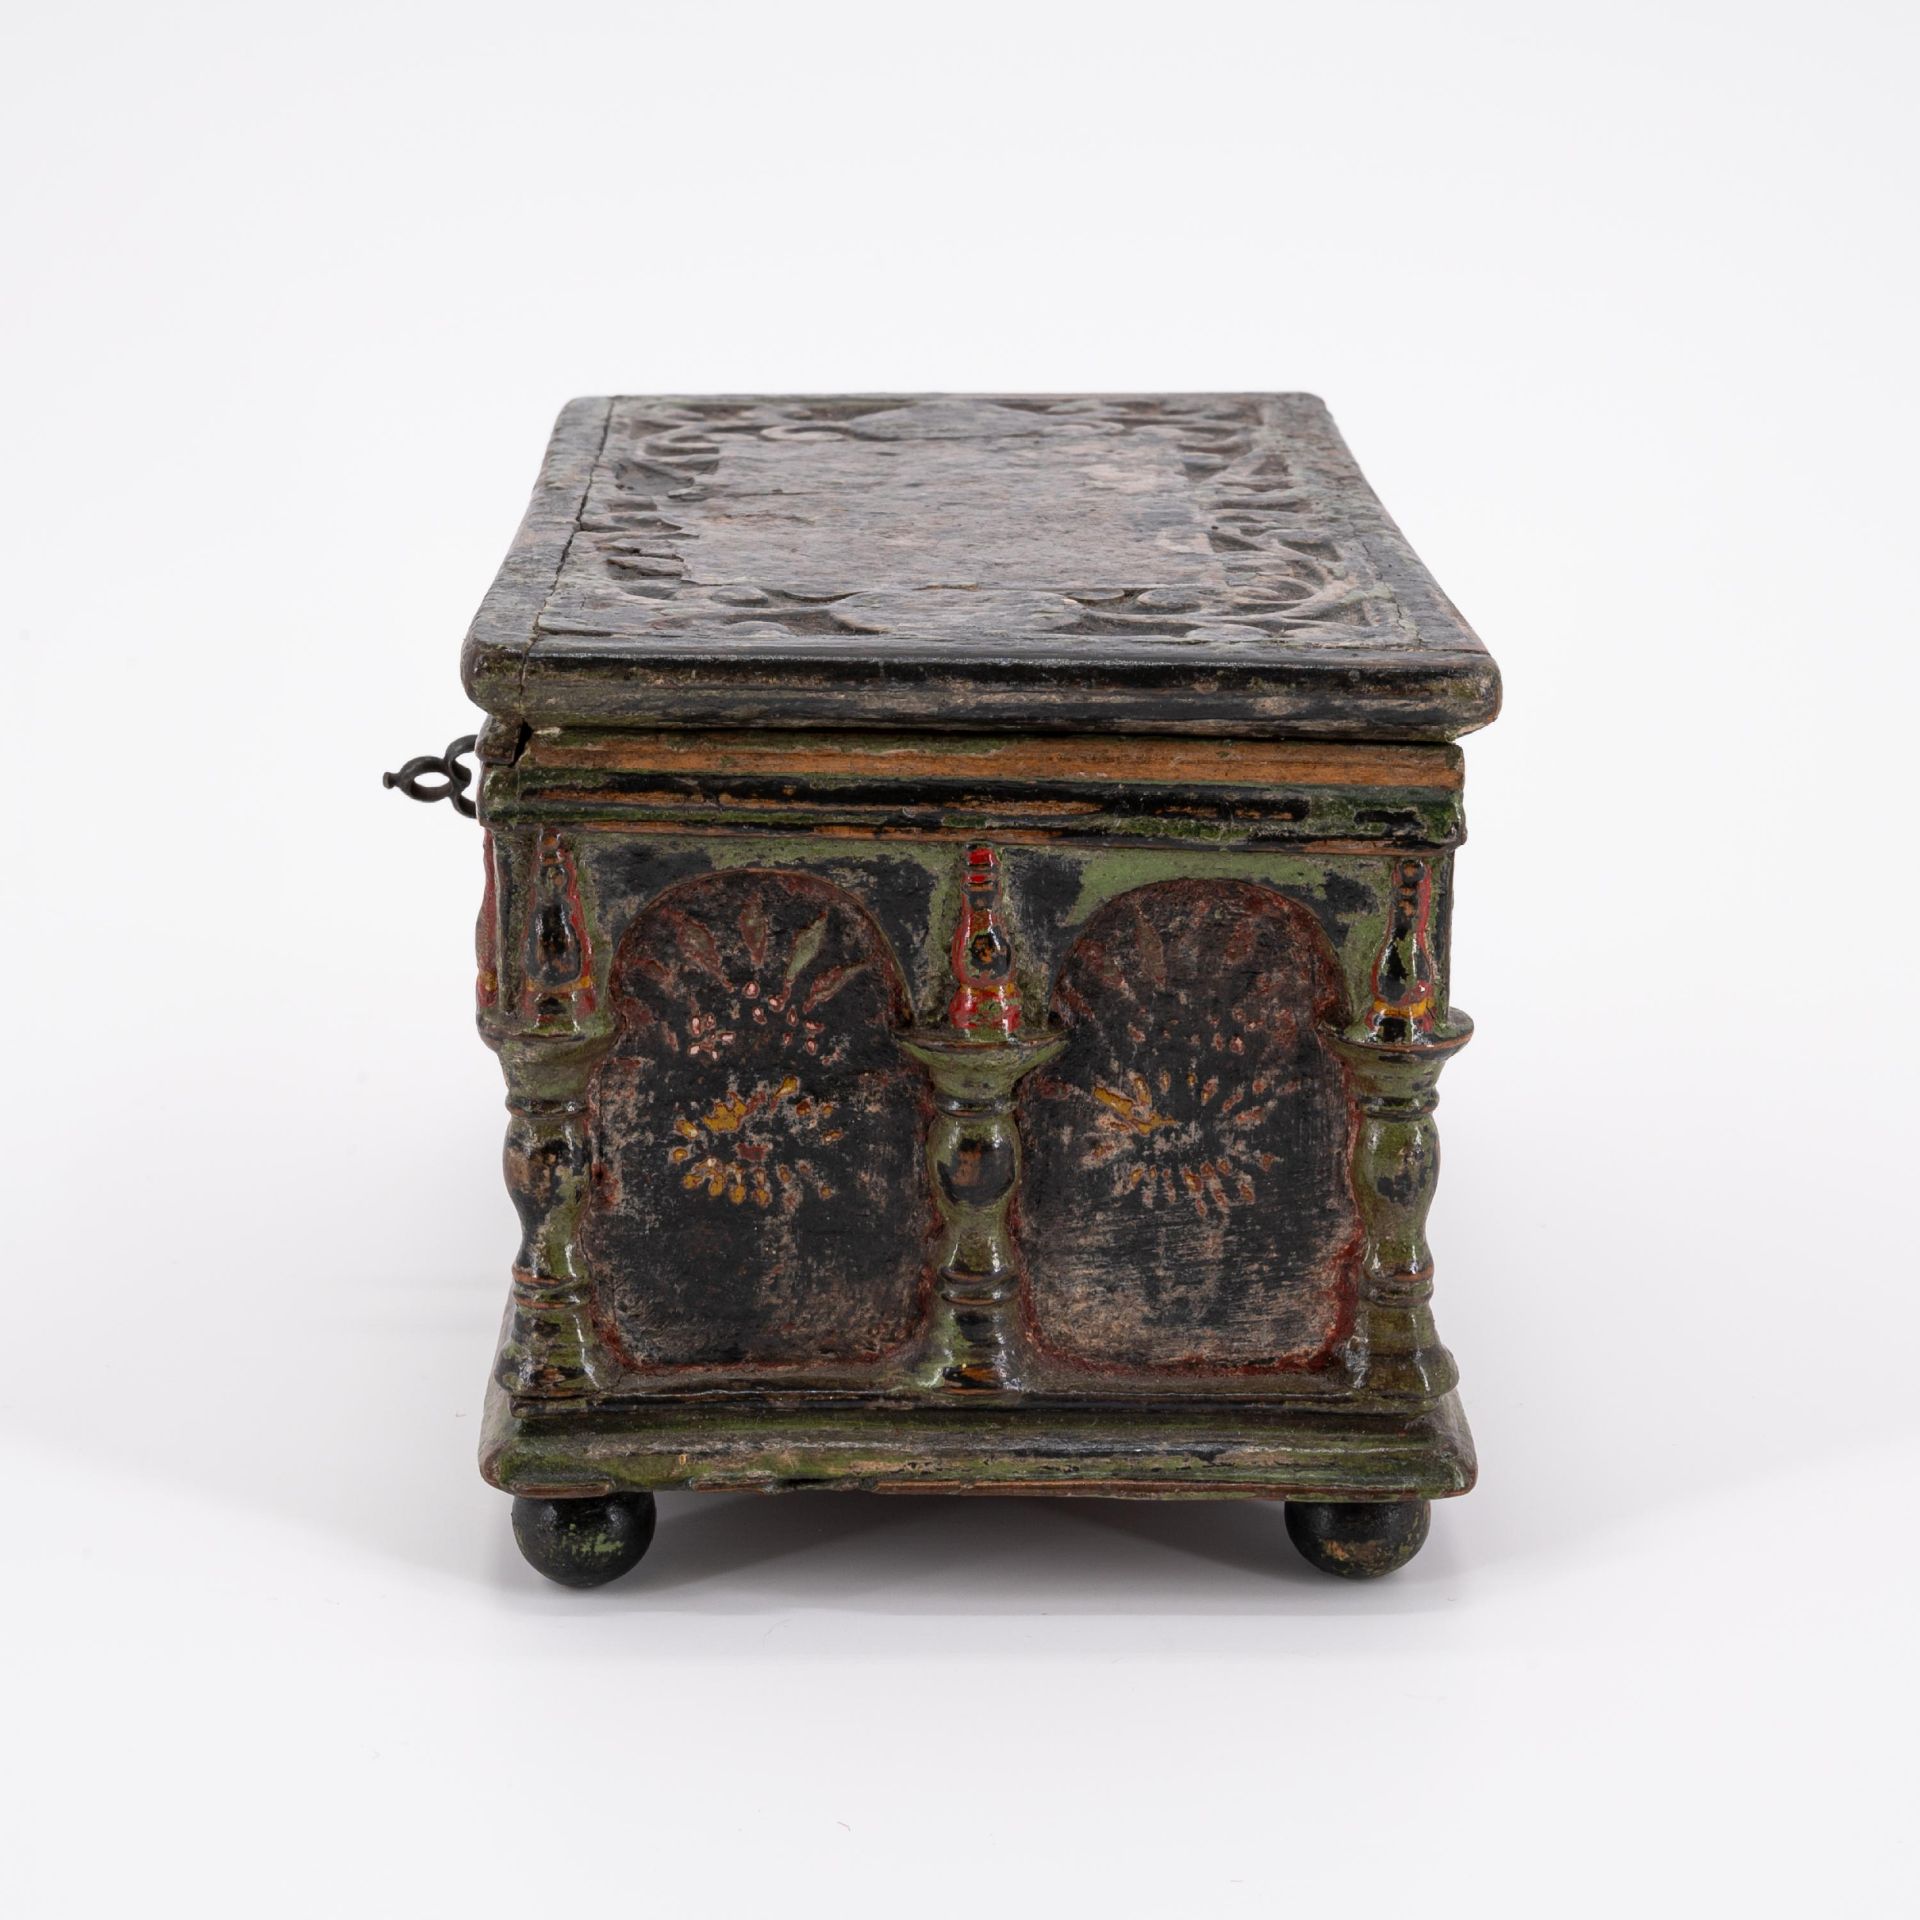 MINIATURE BEECH WOOD CHEST - Image 2 of 7